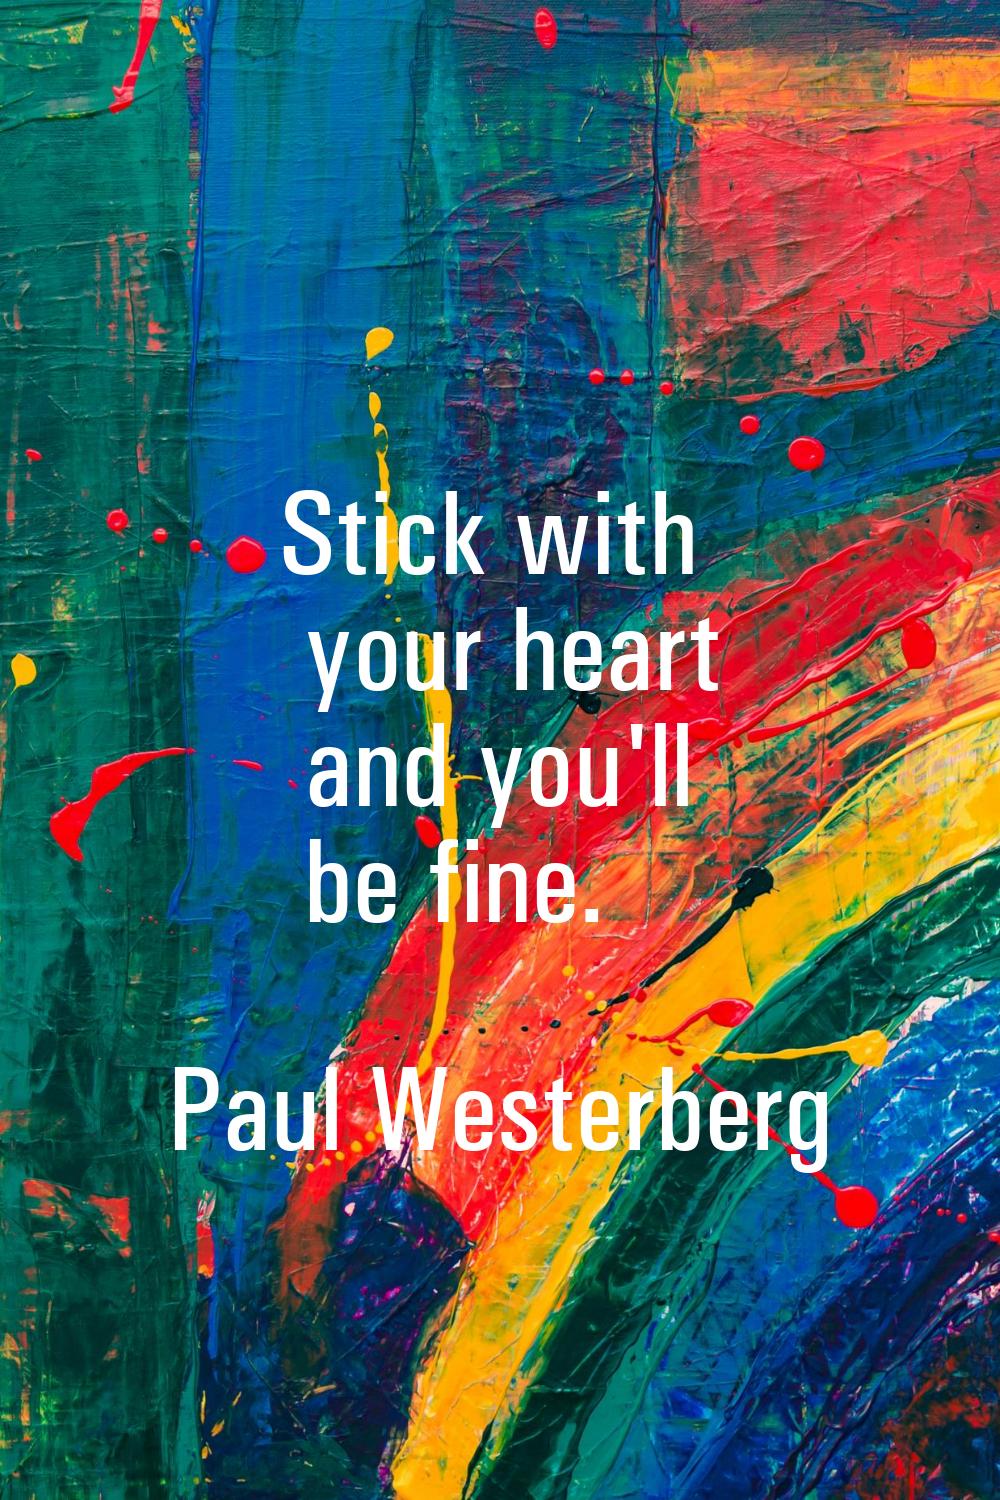 Stick with your heart and you'll be fine.